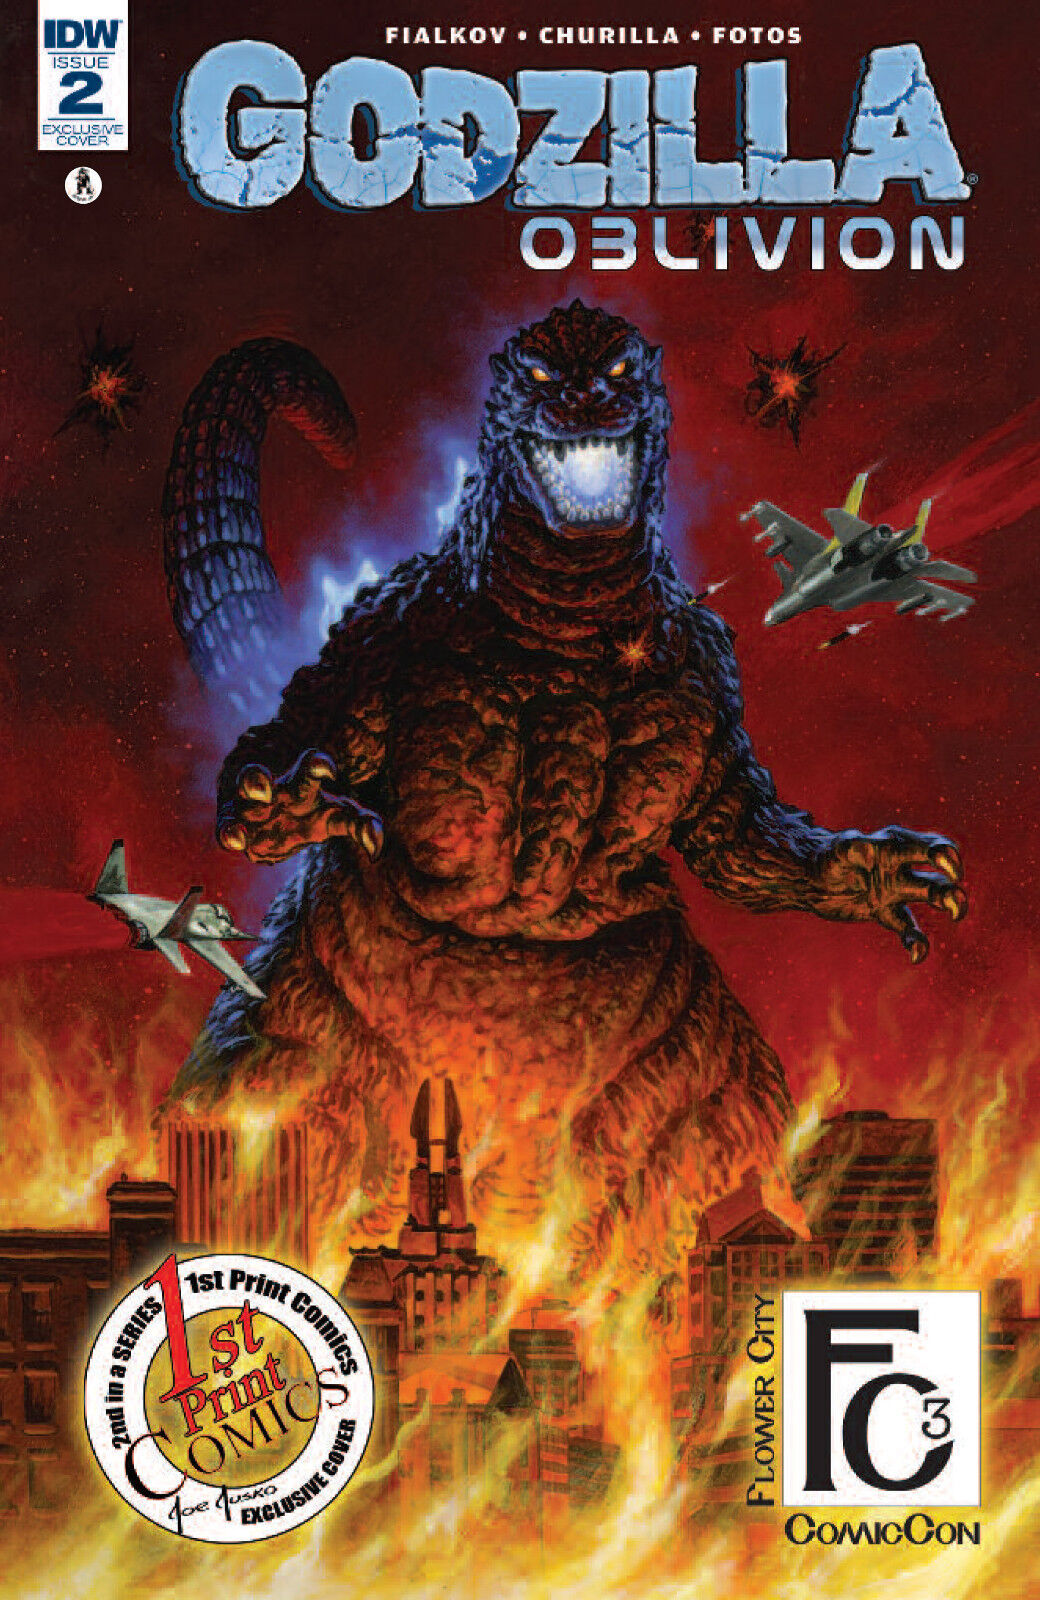 IDW Godzilla: Oblivion #2 1st Print Comics / FC3 Con Excl by Jusko - ONLY 1100